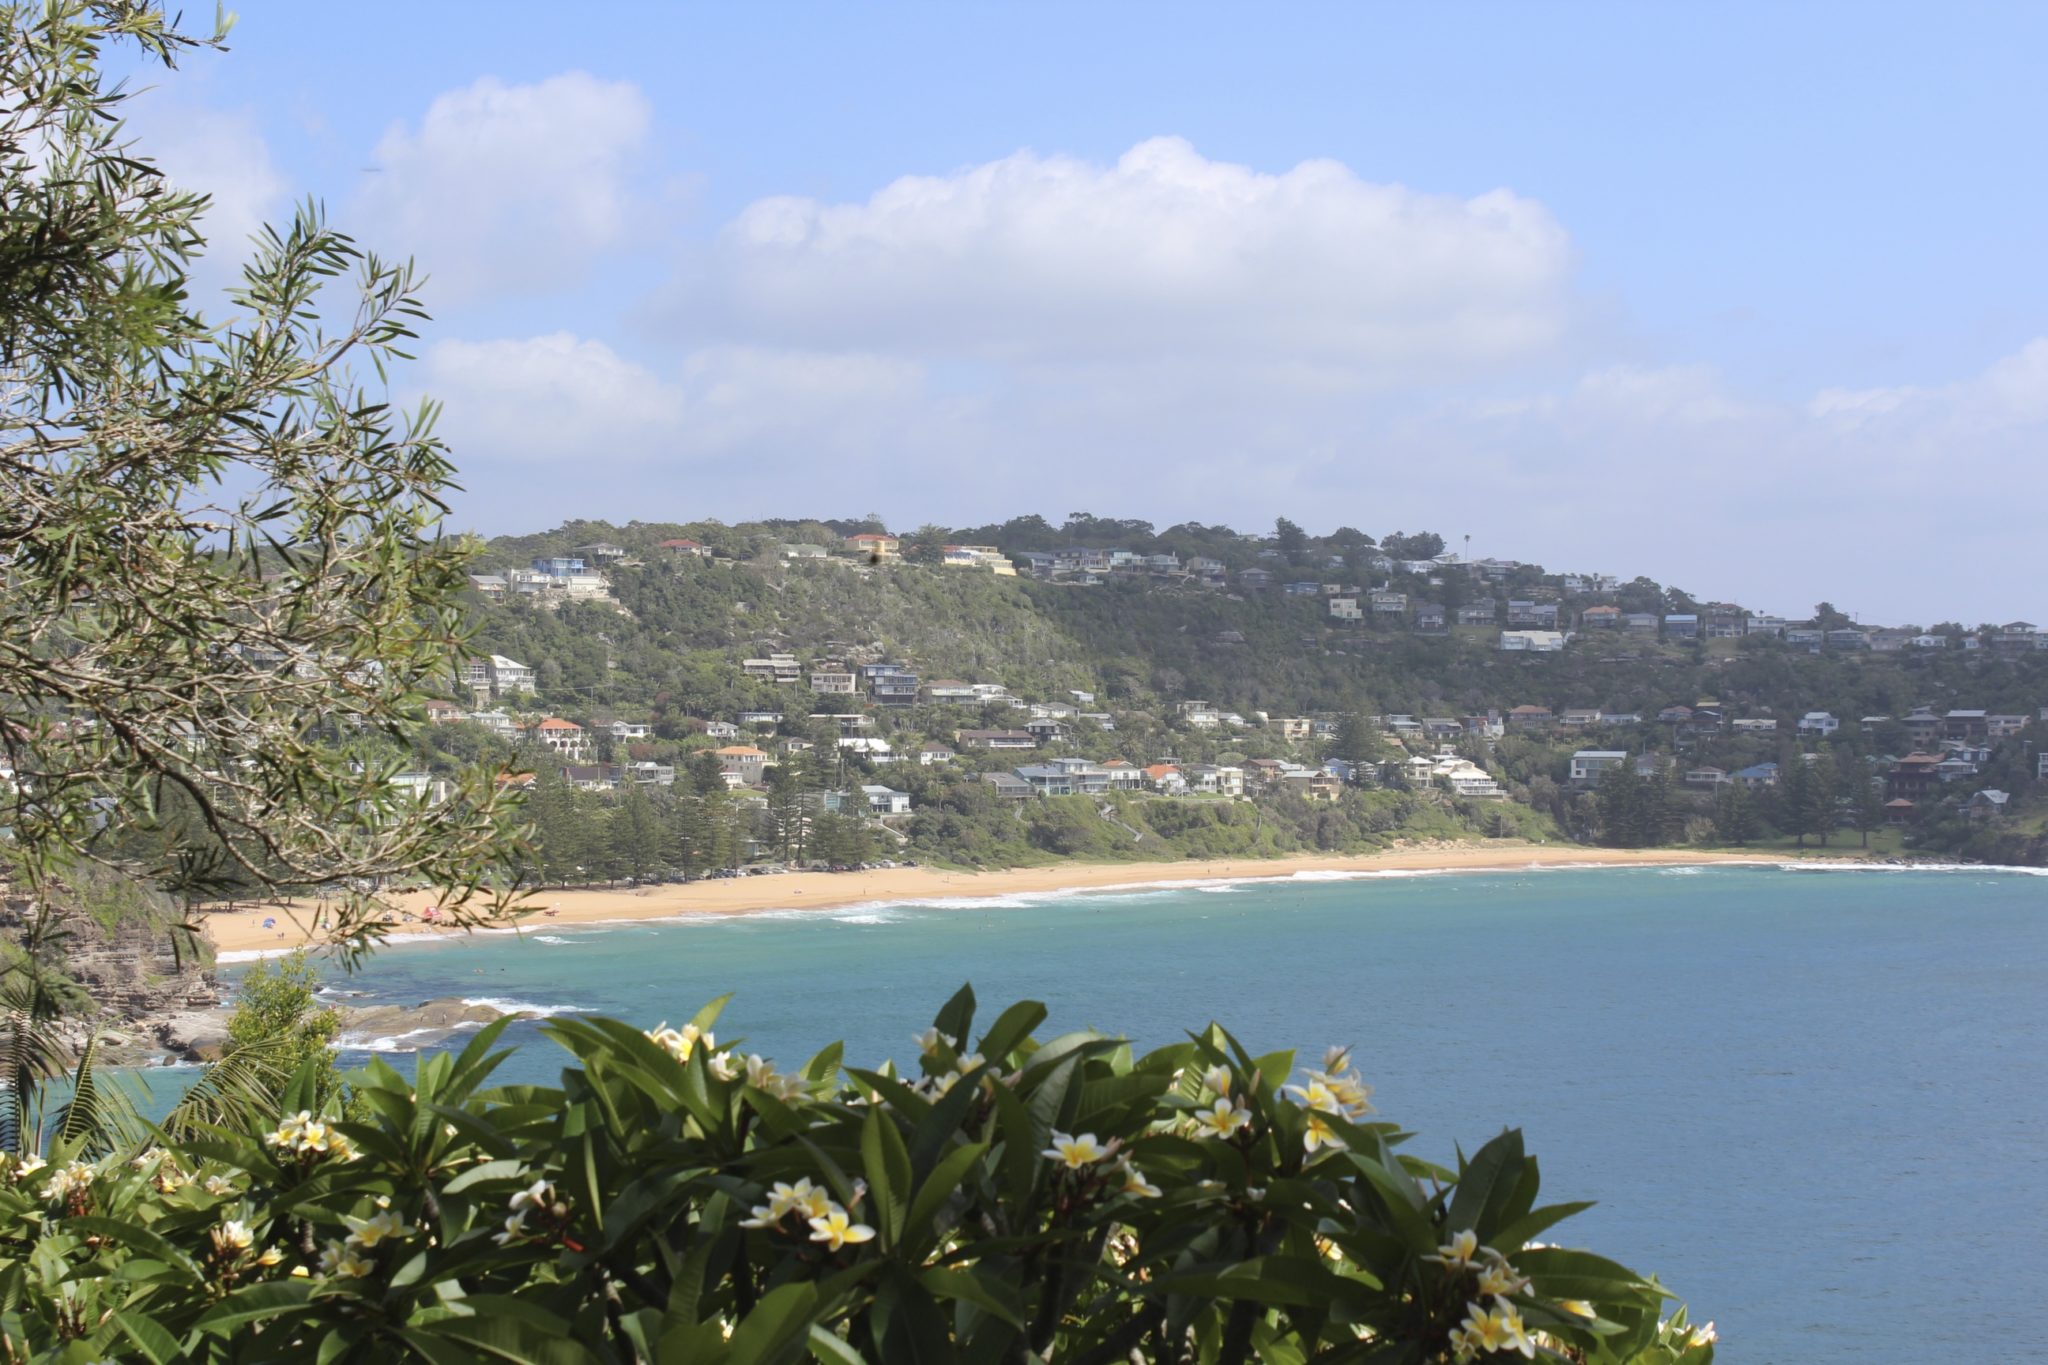 It's easy to see why Sydney is in love with its beaches - look at Whale Beach!